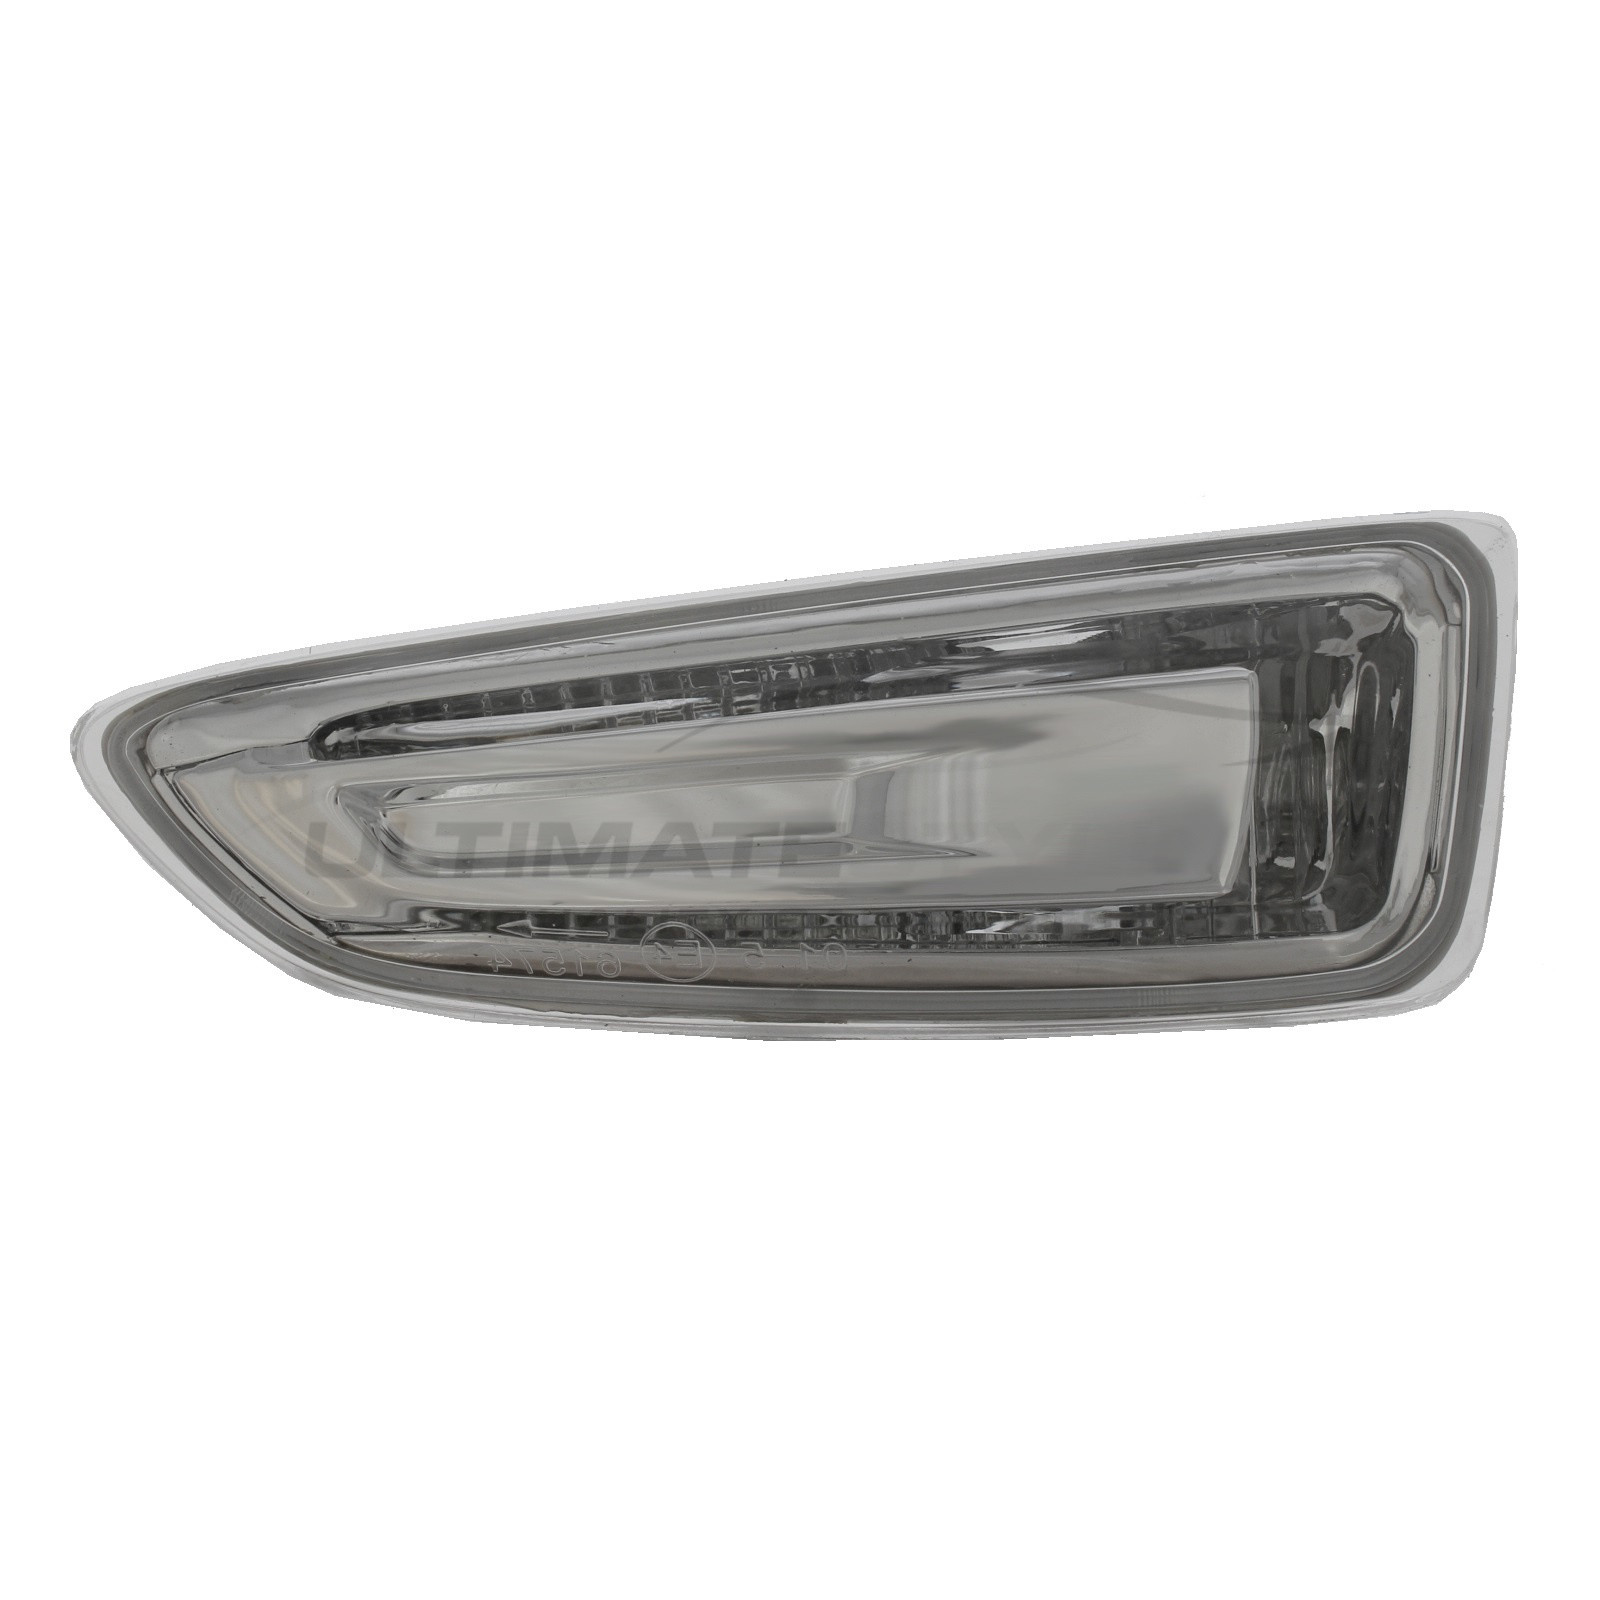 Vauxhall Astra / GTC Side Repeater - Passenger Side (LH) - Clear lens - Non-LED